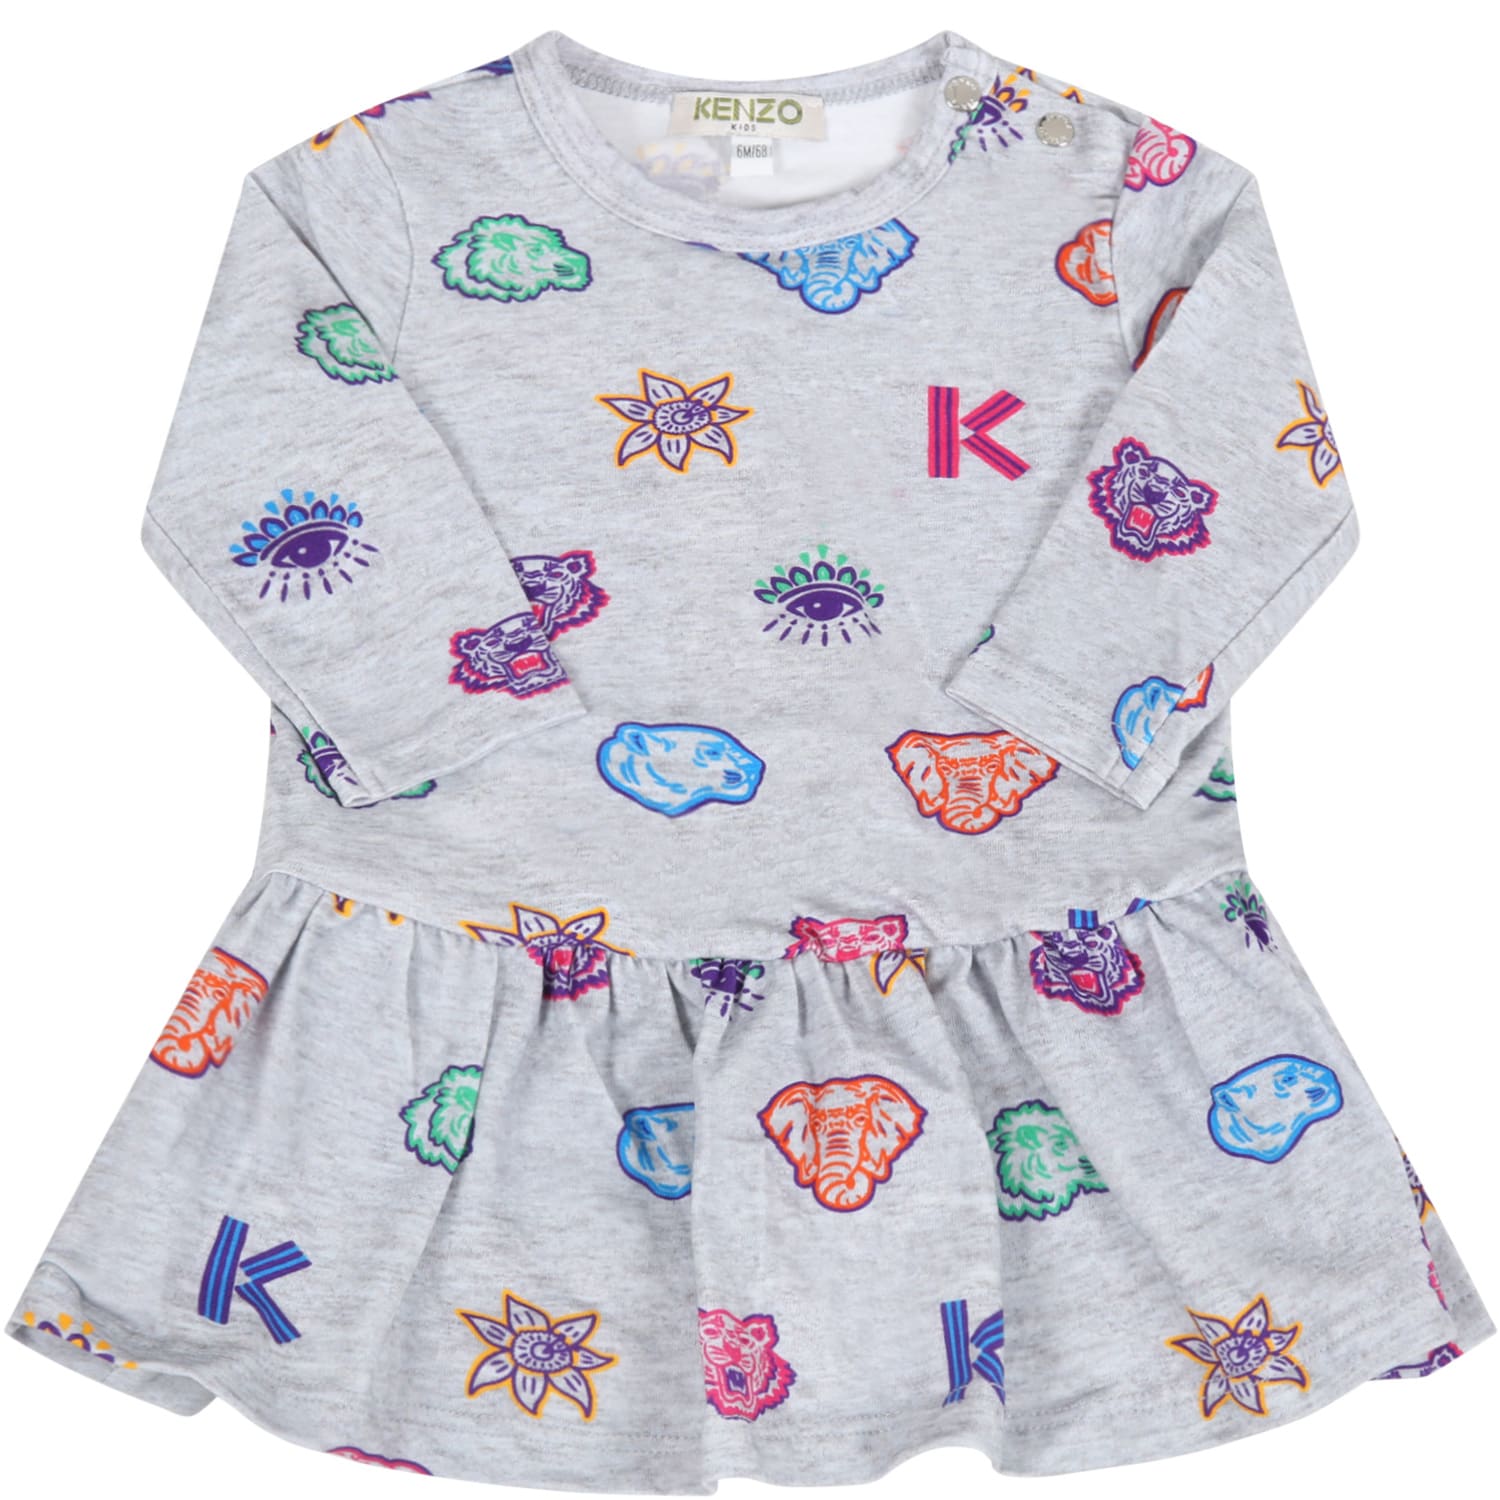 Kenzo Kids Grey Dress For Babygirl With Prints